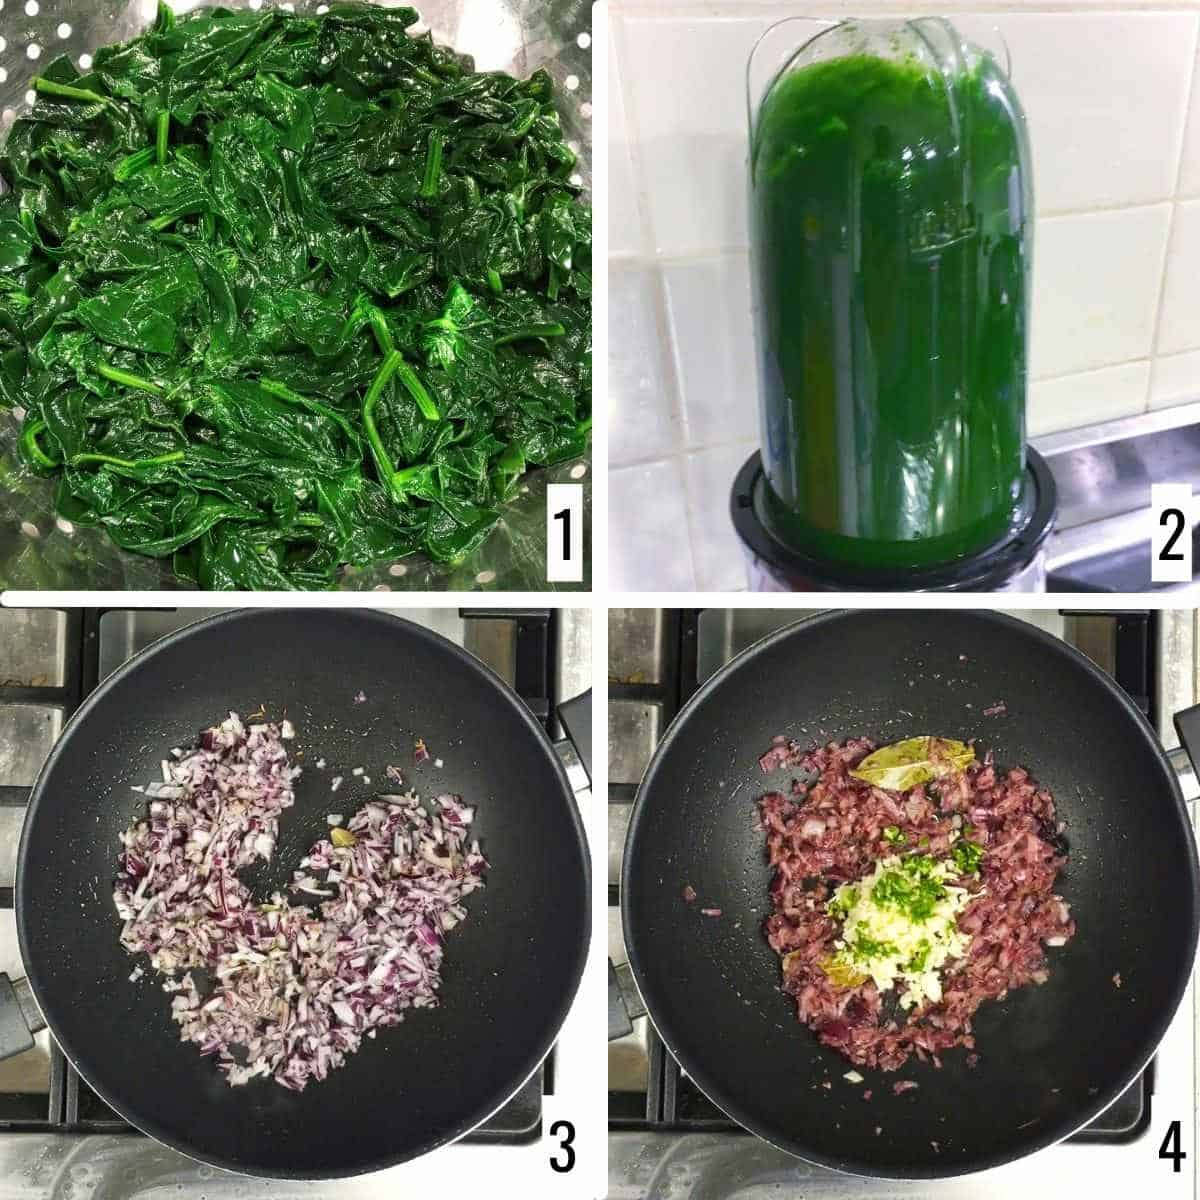 A 4-step collage showing the steps to prep the spinach and saute onions.